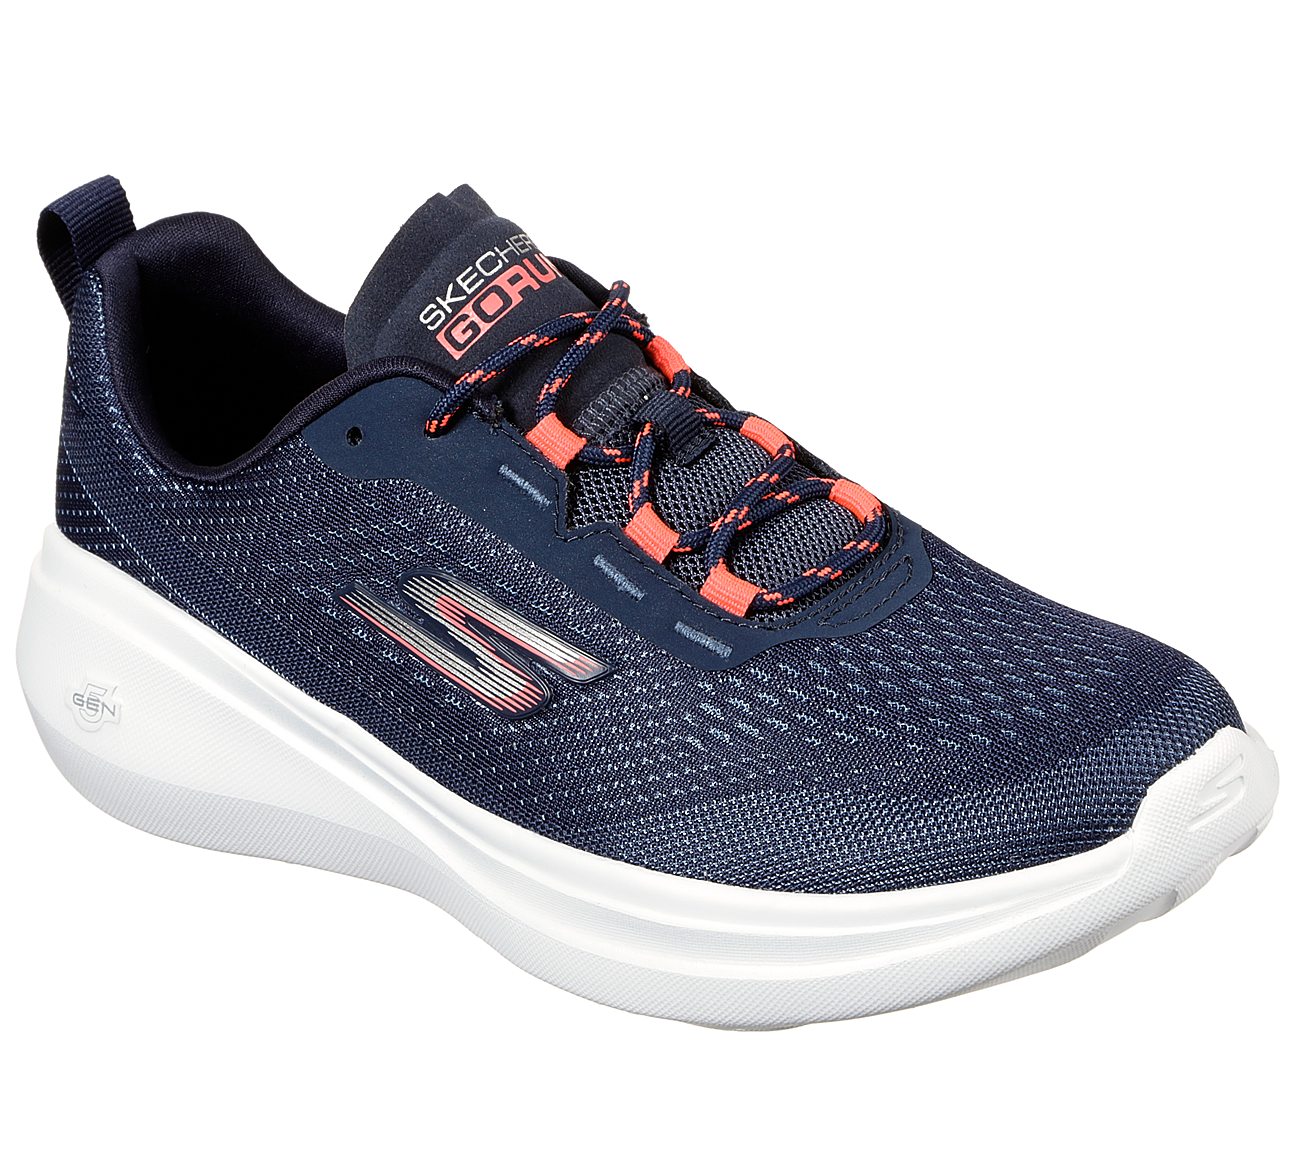 GO RUN FAST - LASER, NAVY/CORAL Footwear Right View